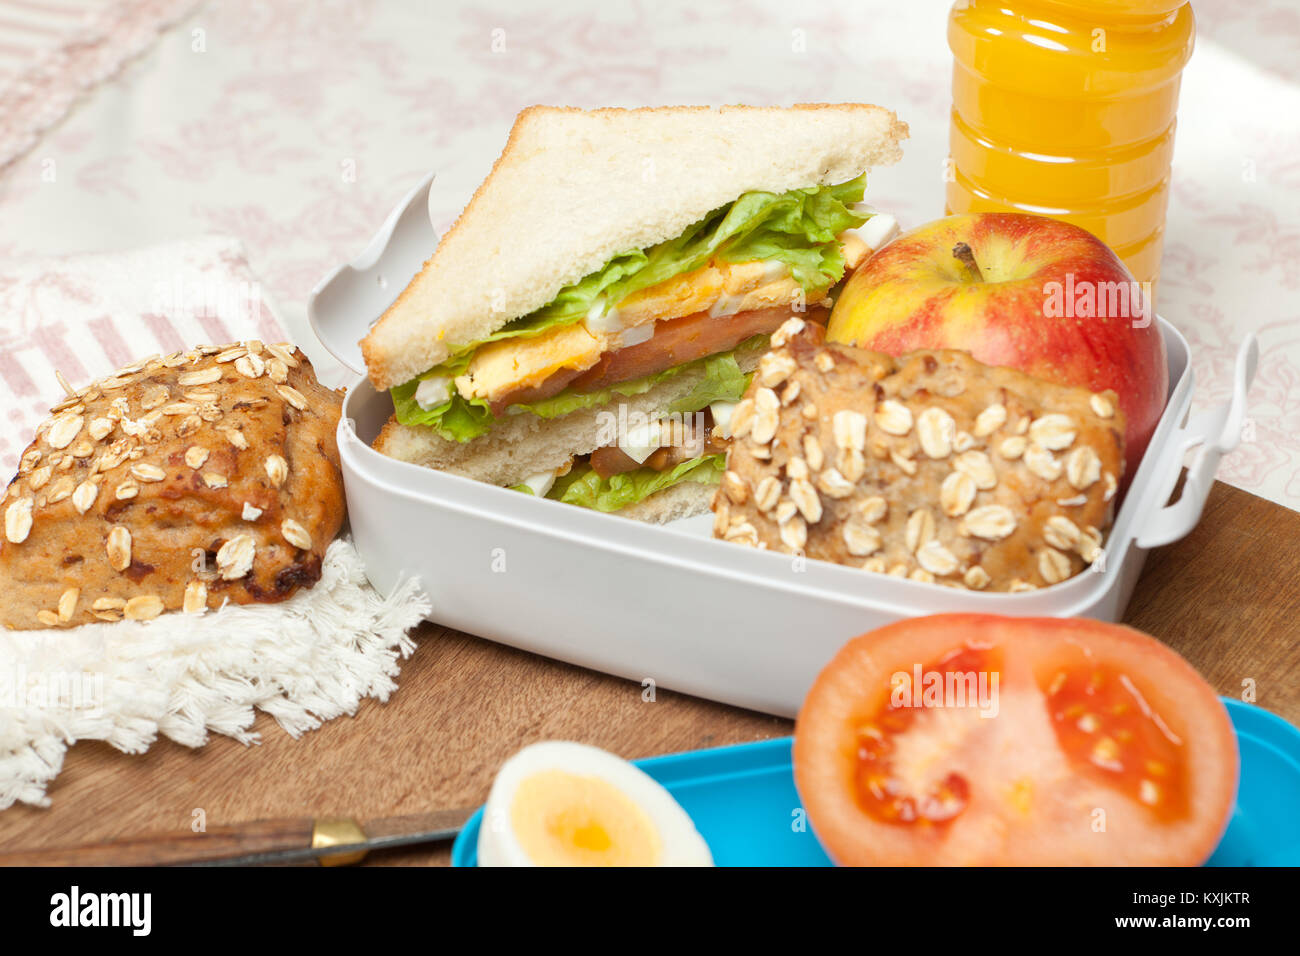 Lunchbox on the morning breakfast table with sandwiches Stock Photo